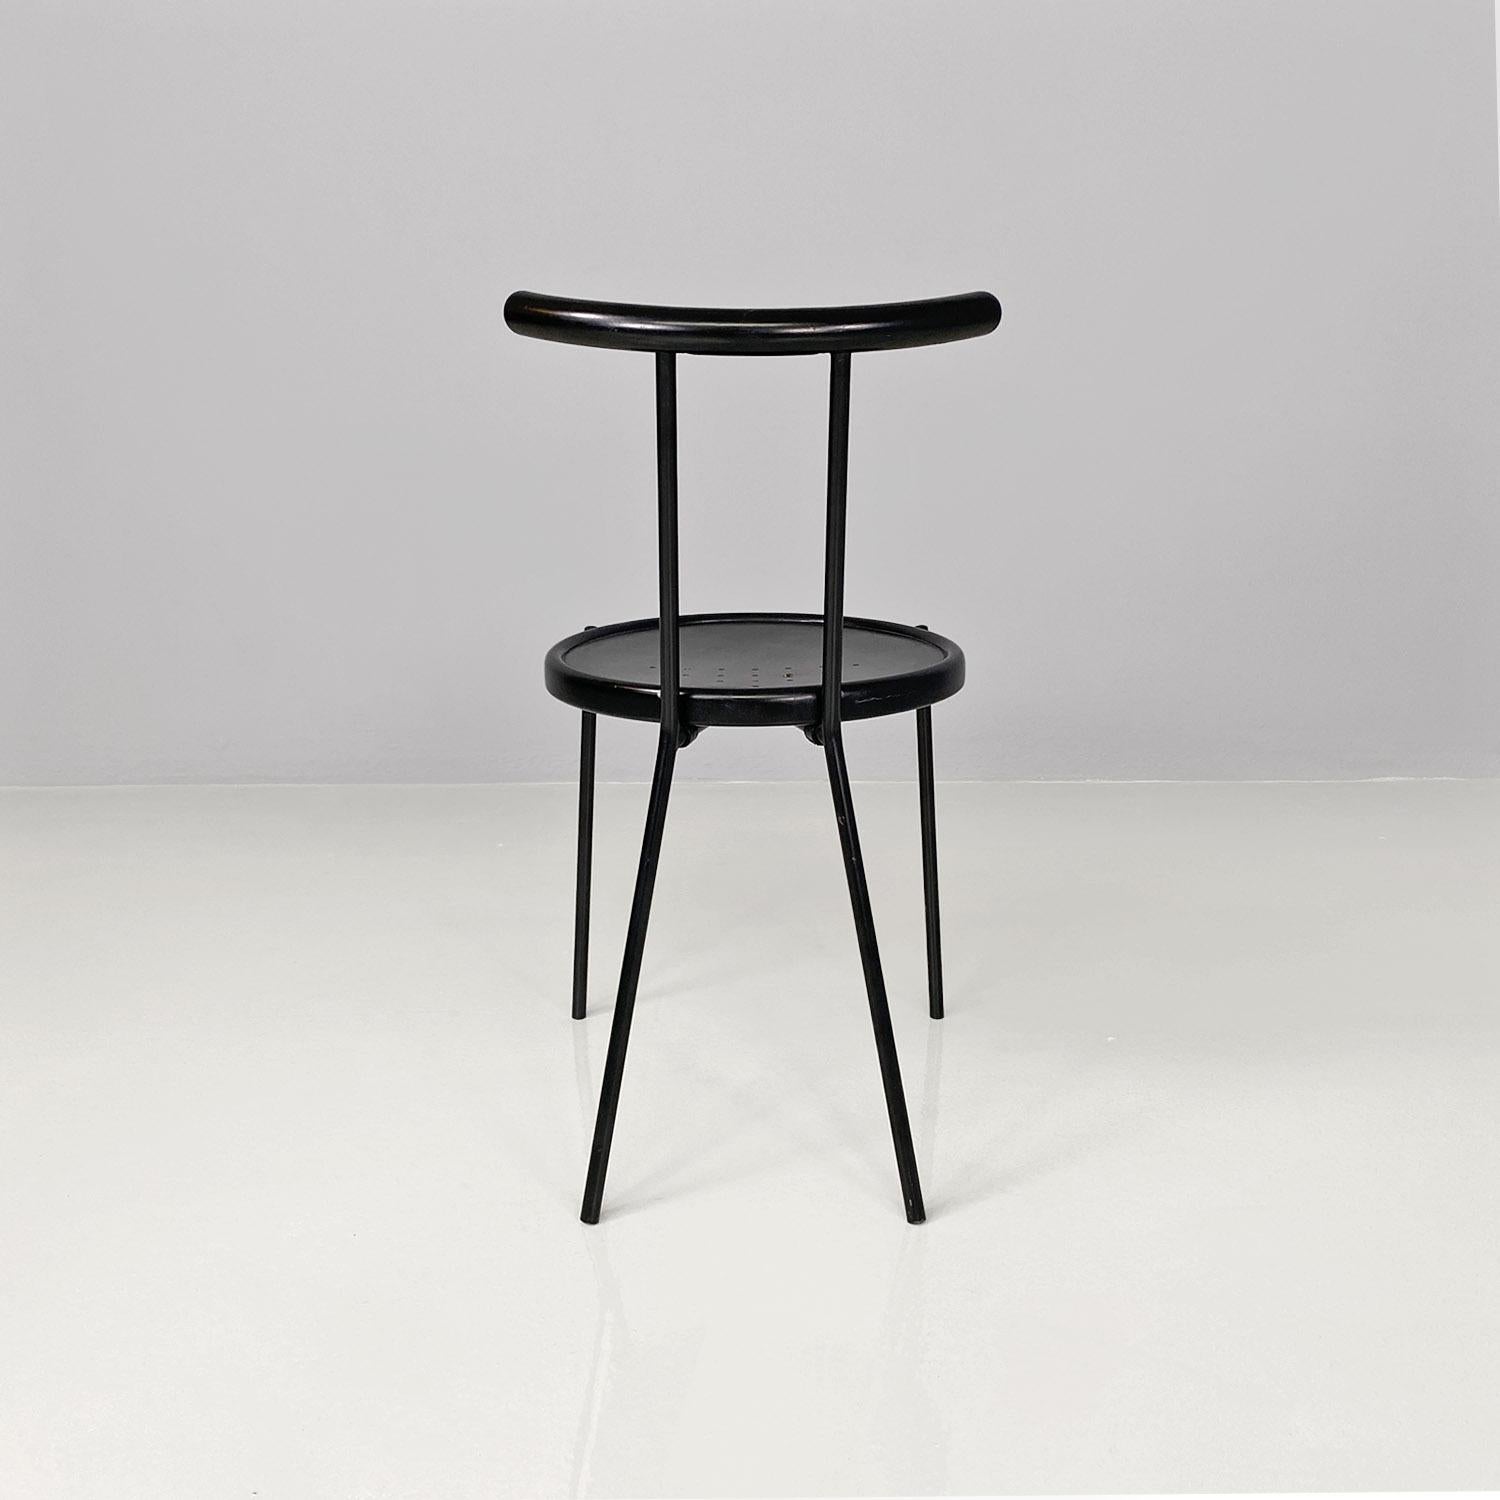 Italian modern round black wood and metal chair, 1980s For Sale 1